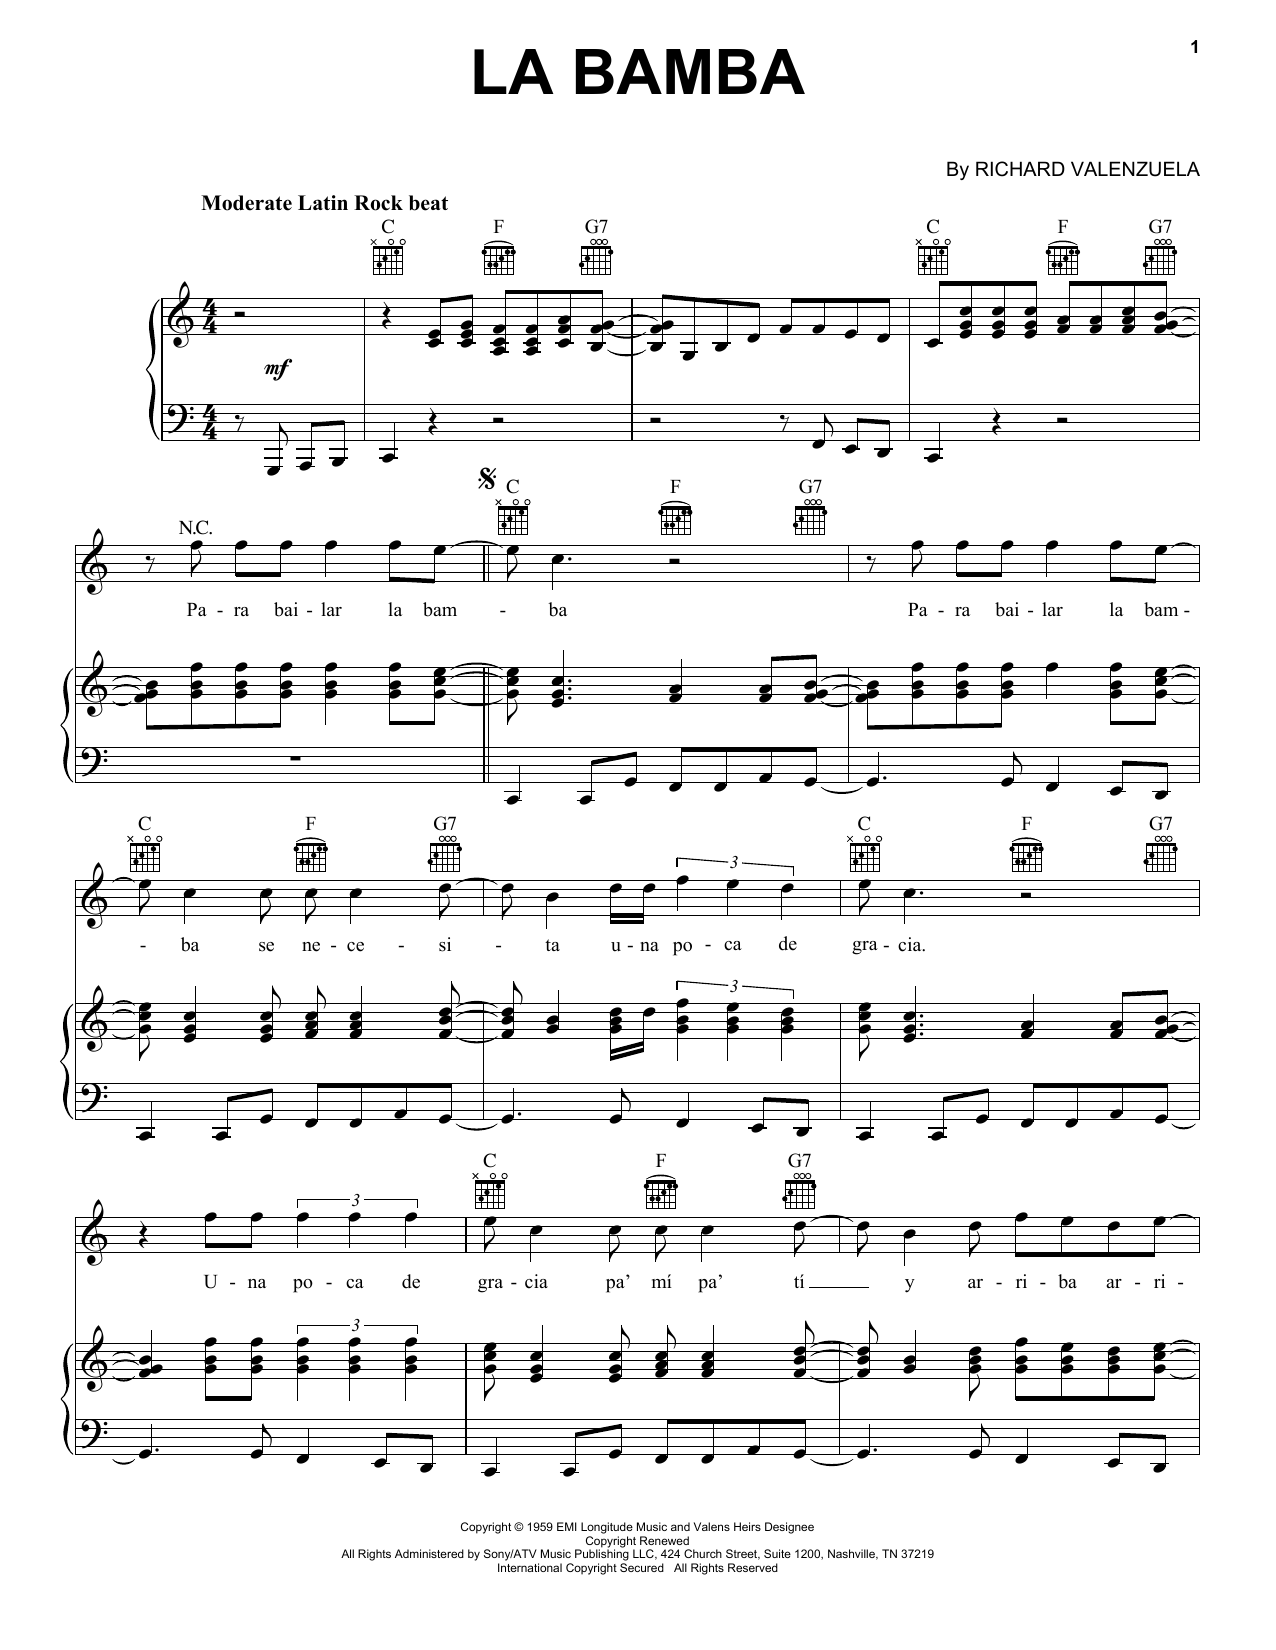 Ritchie Valens La Bamba sheet music notes and chords. Download Printable PDF.